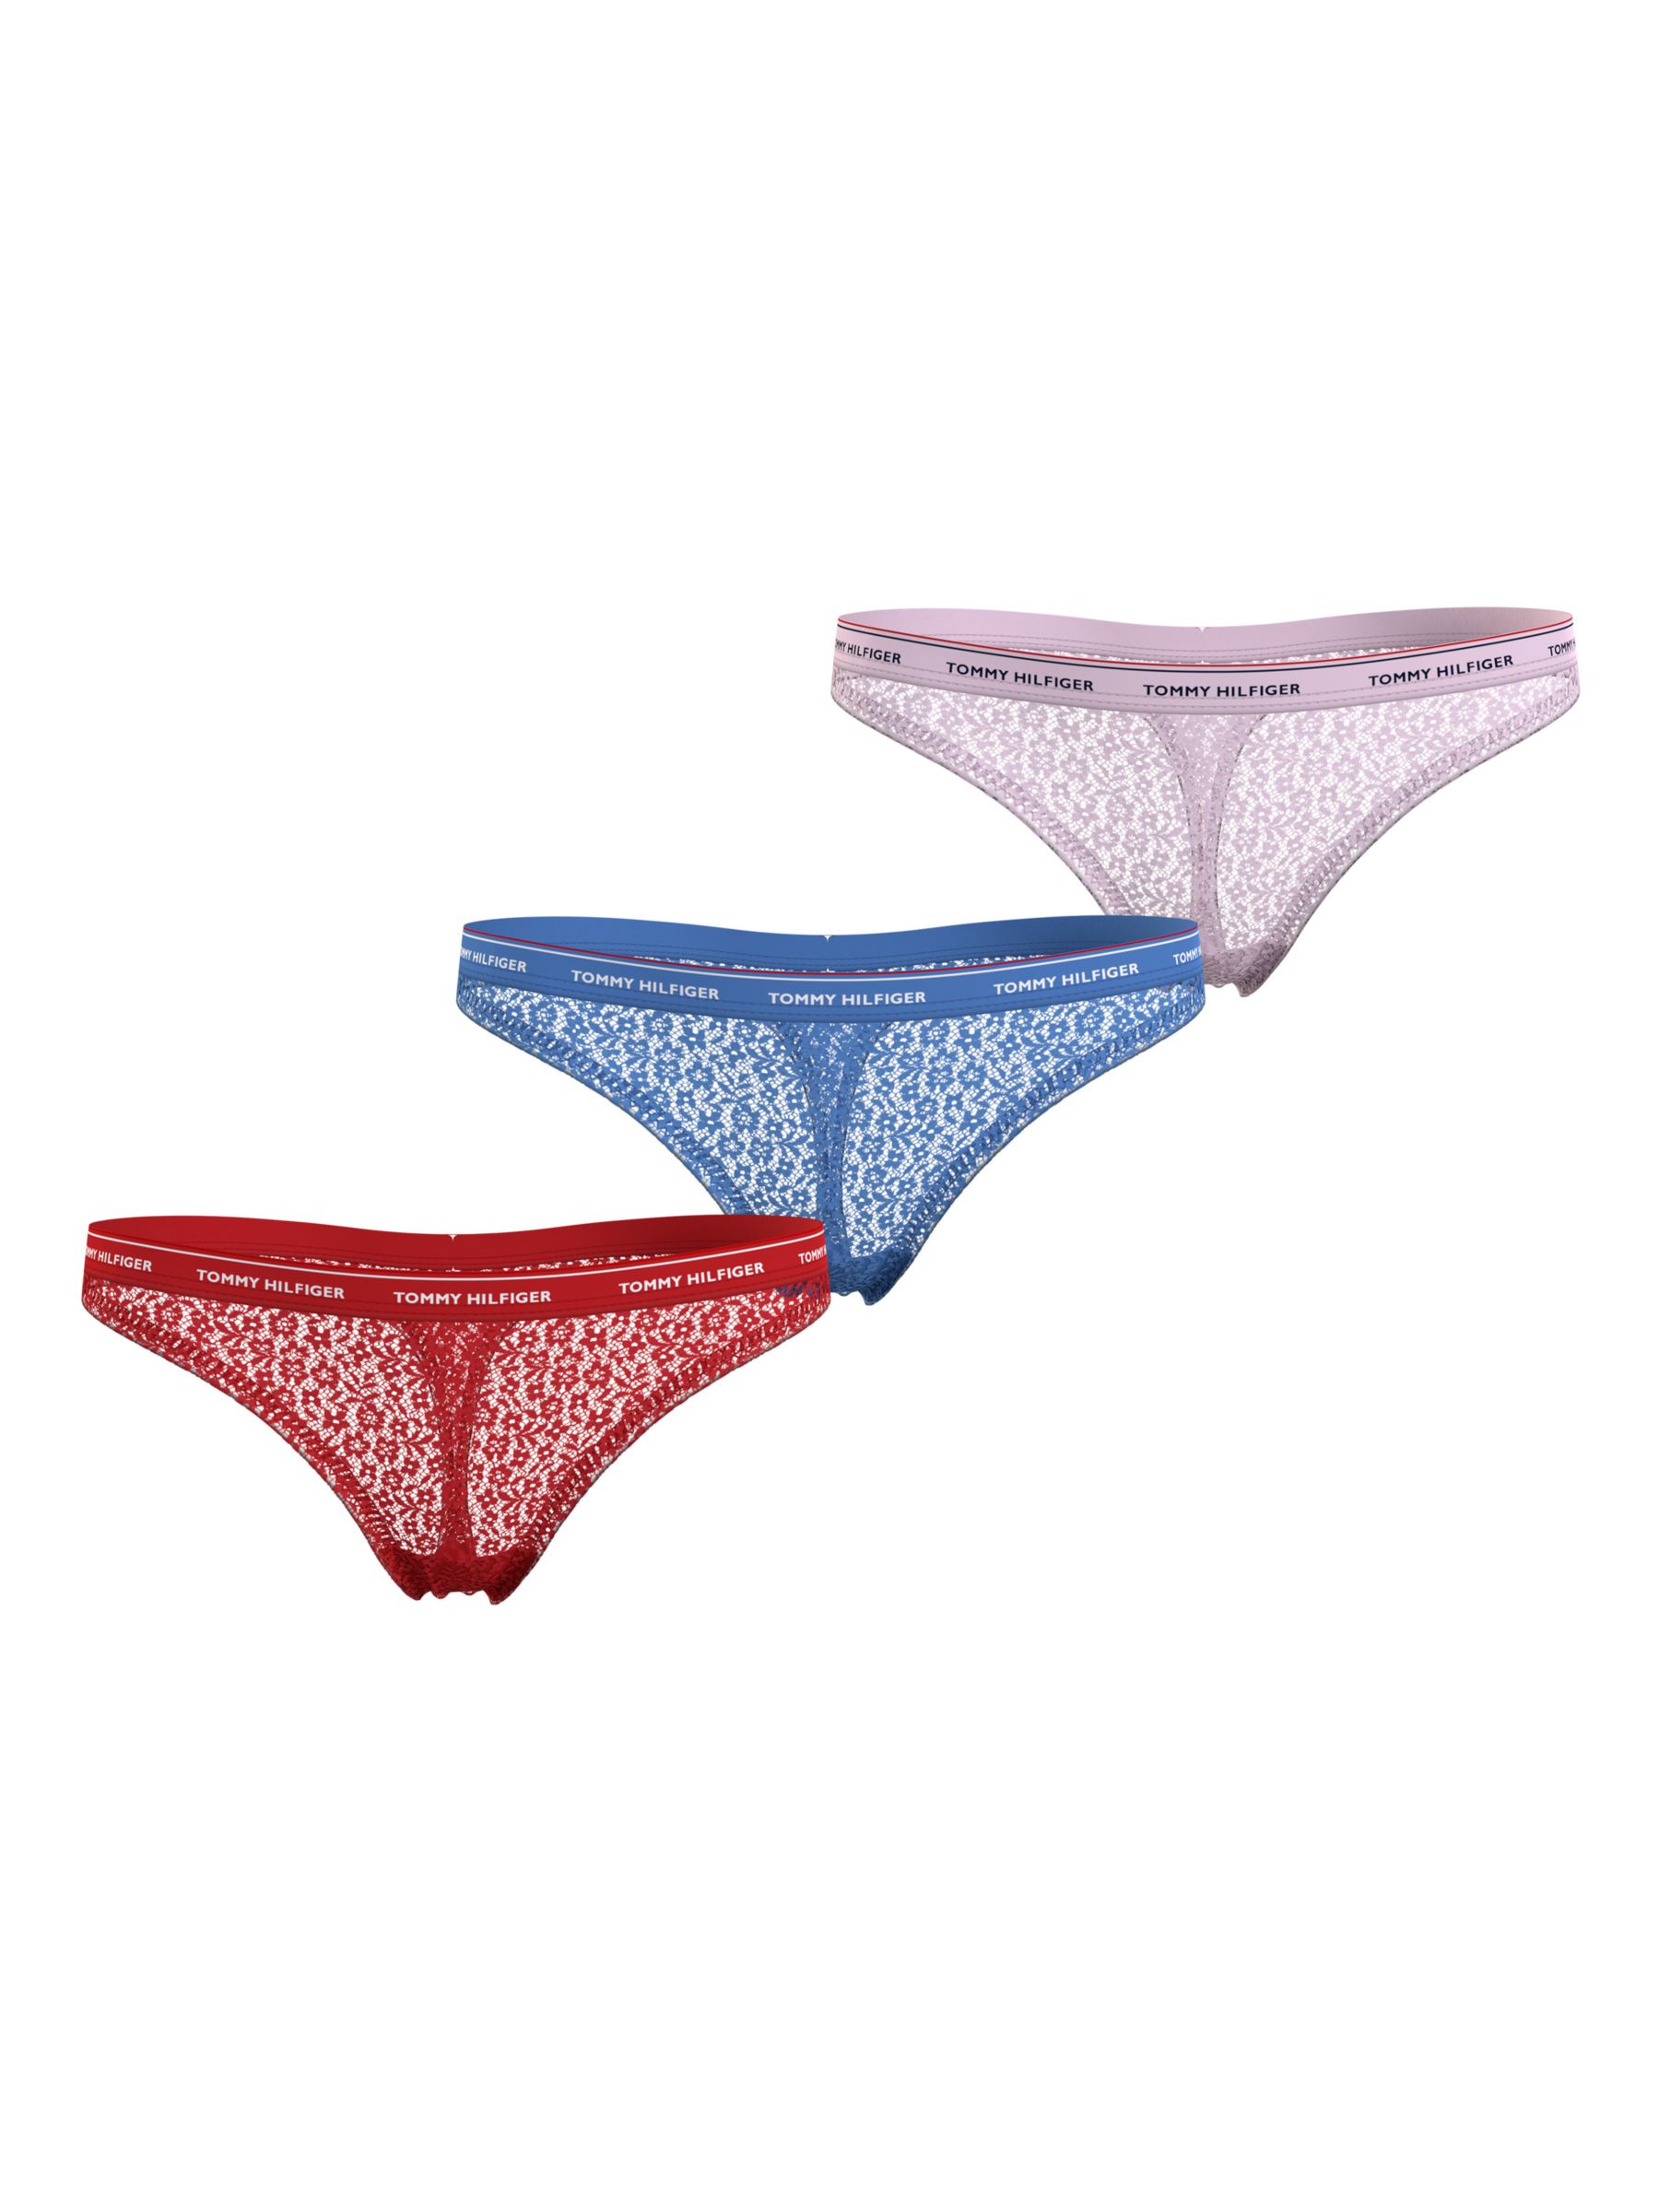 Tommy Hilfiger Lace Thong, Pack of 3, Red/Blue/Pink, L